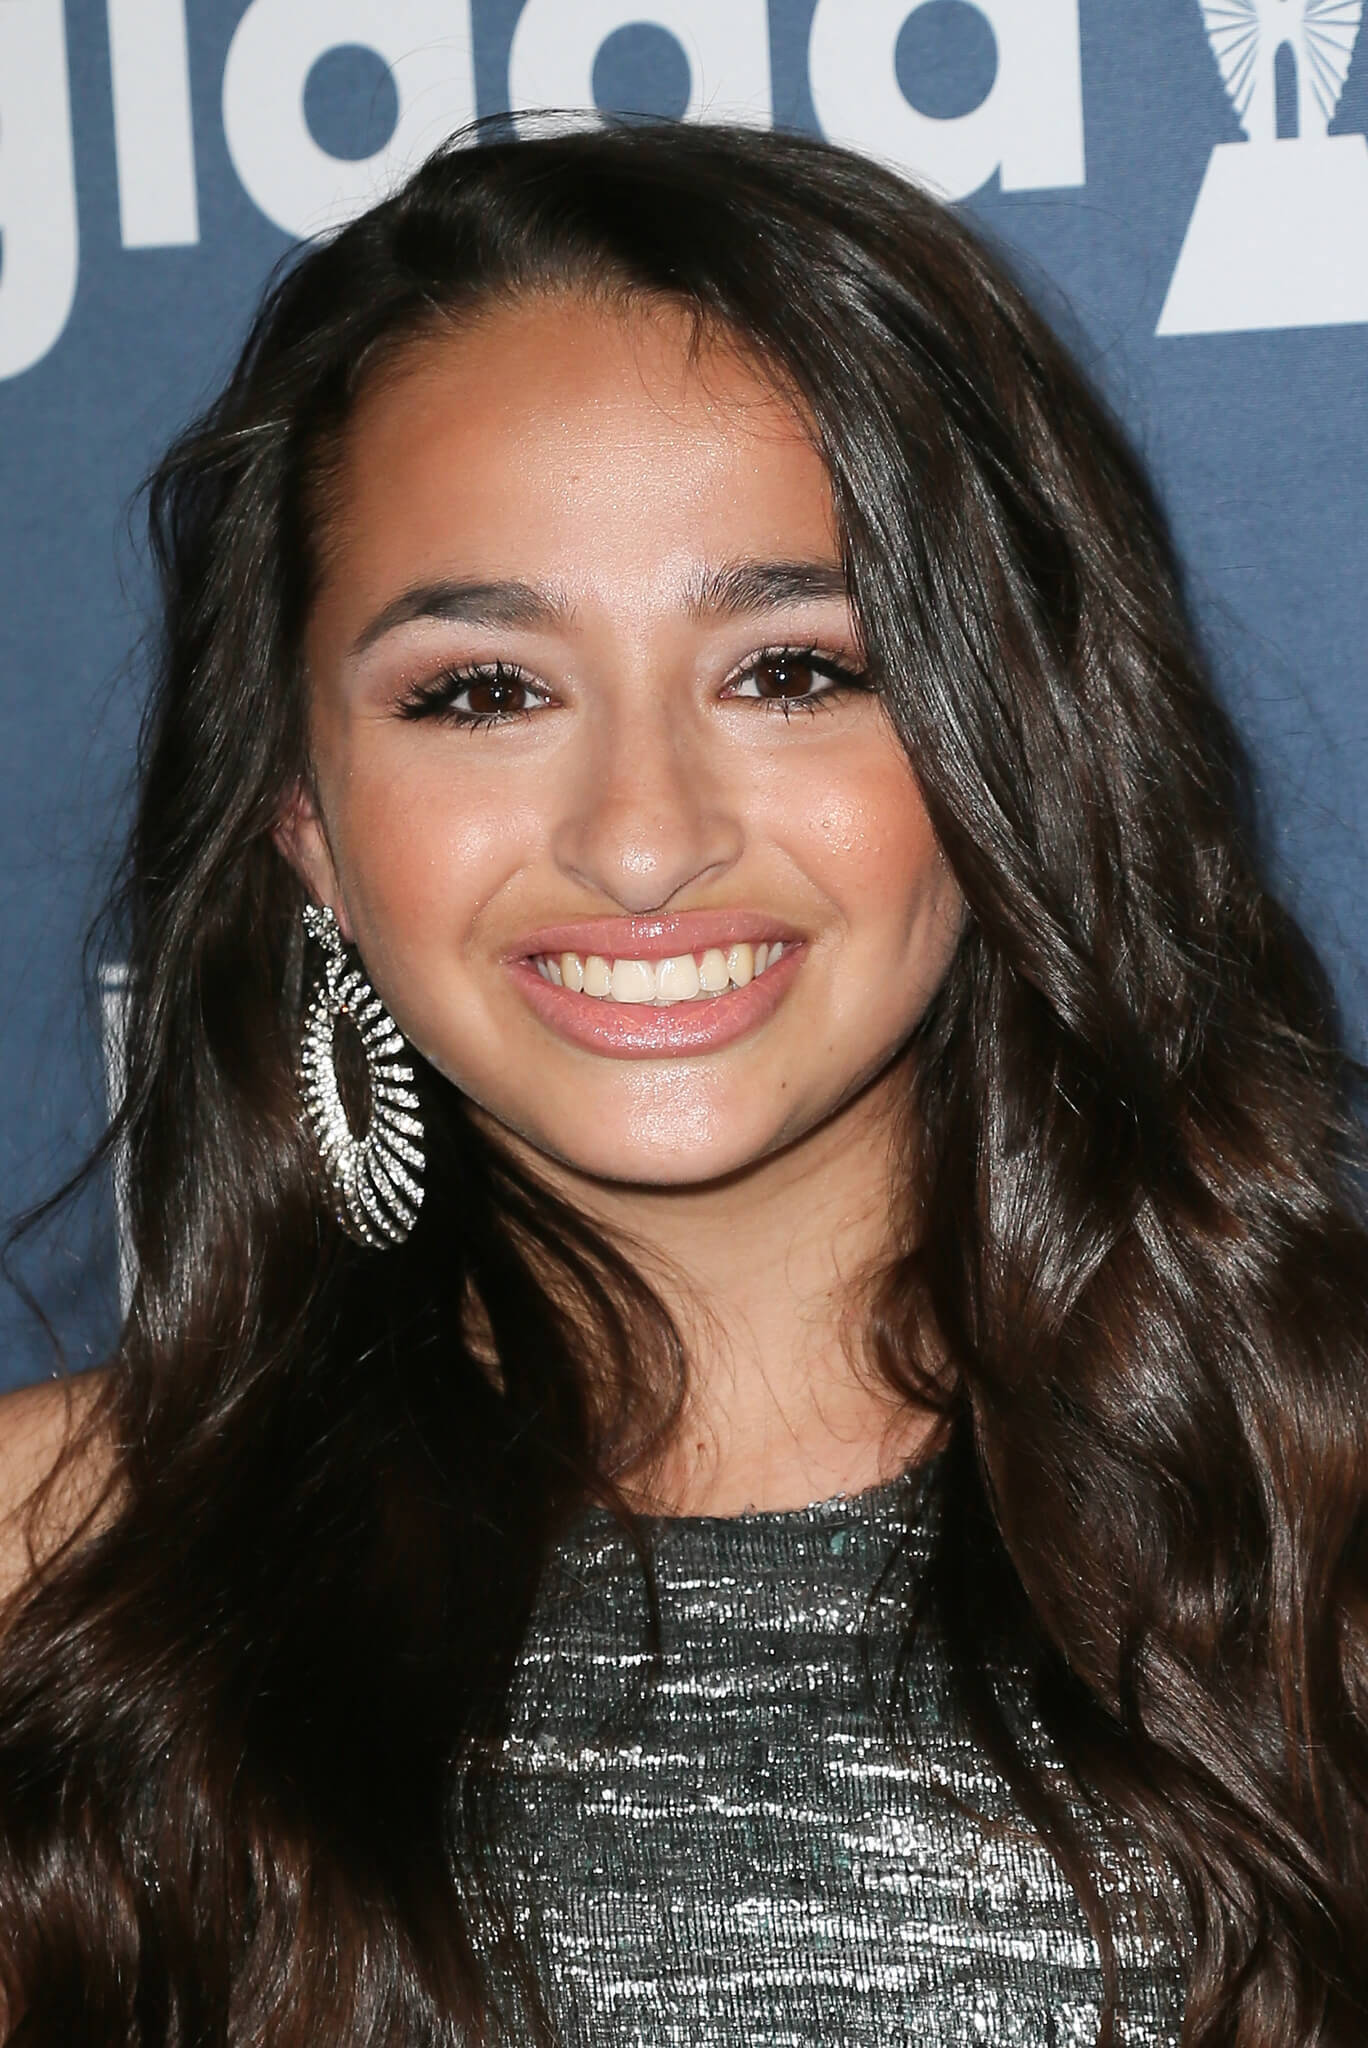 70+ Hot Pictures Of Jazz Jennings Which Will Make Your Mouth Water 43